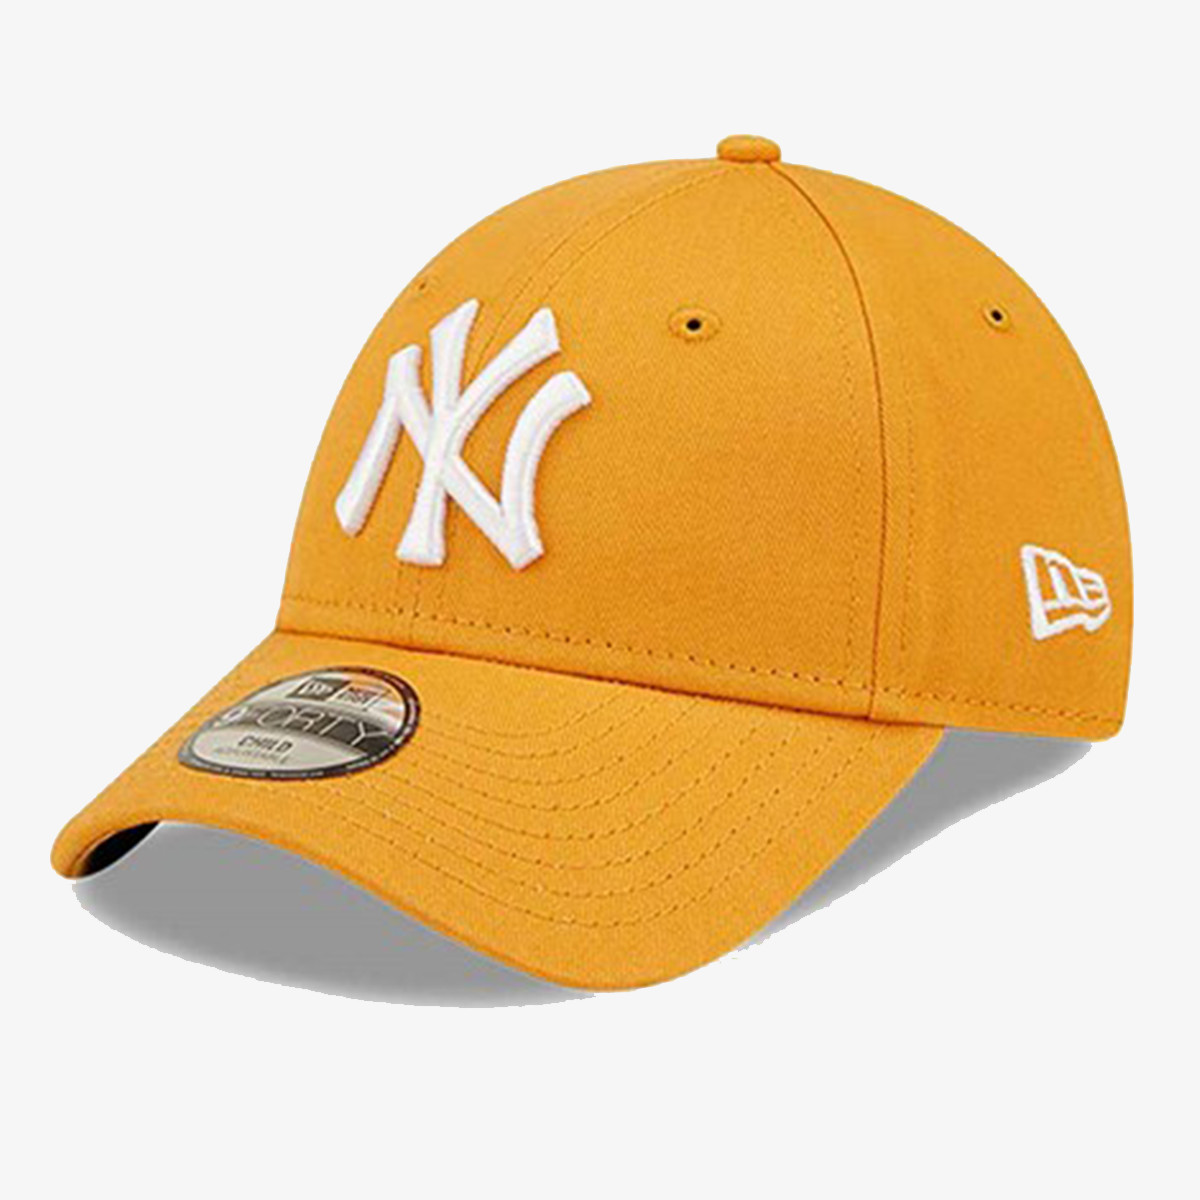 KIDS CHYT LEAGUE ESS 9FORTY® NEW YORK YANKEES 